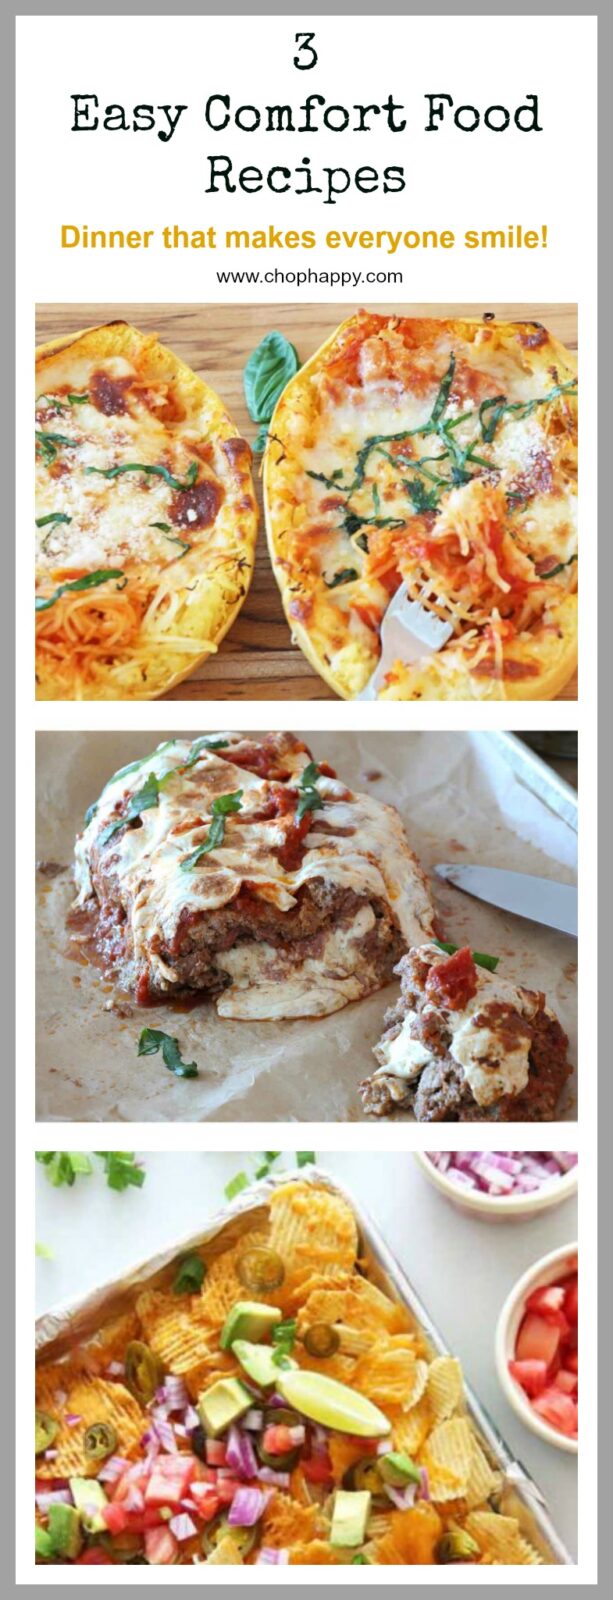 3 Comfort Food Recipes We Love- are easy dinner recipe ideas that will warm your families soul. www.ChopHappy.com